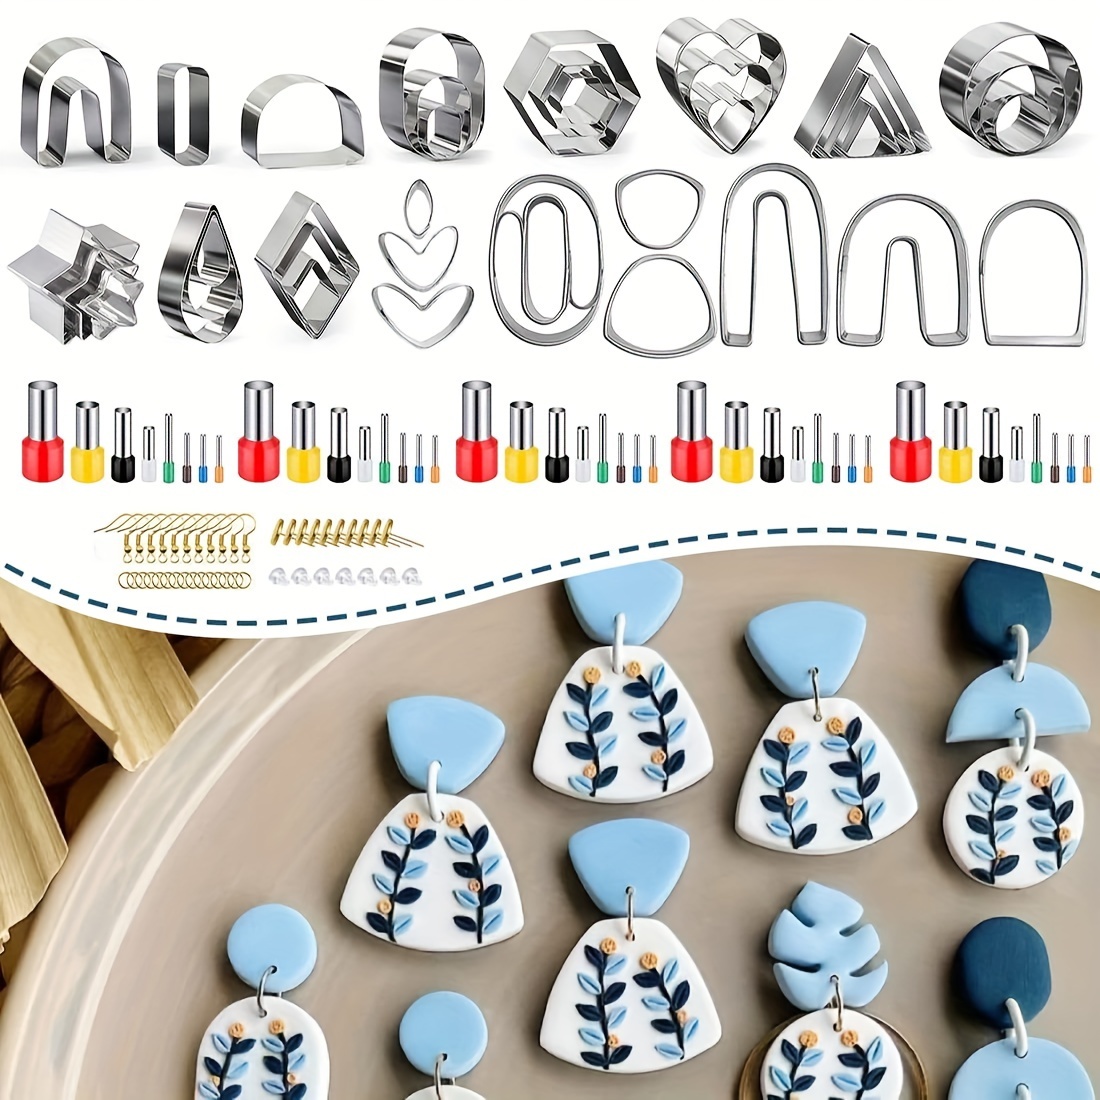  Polymer Clay Cutters for Halloween Earrings Making, 12 Shapes  Halloween Clay Earrings Cutters Stainless Steel with 640 Jewelry Making  Accessories 16 Circle Shape Cutter Tools for Polymer Clay Earring